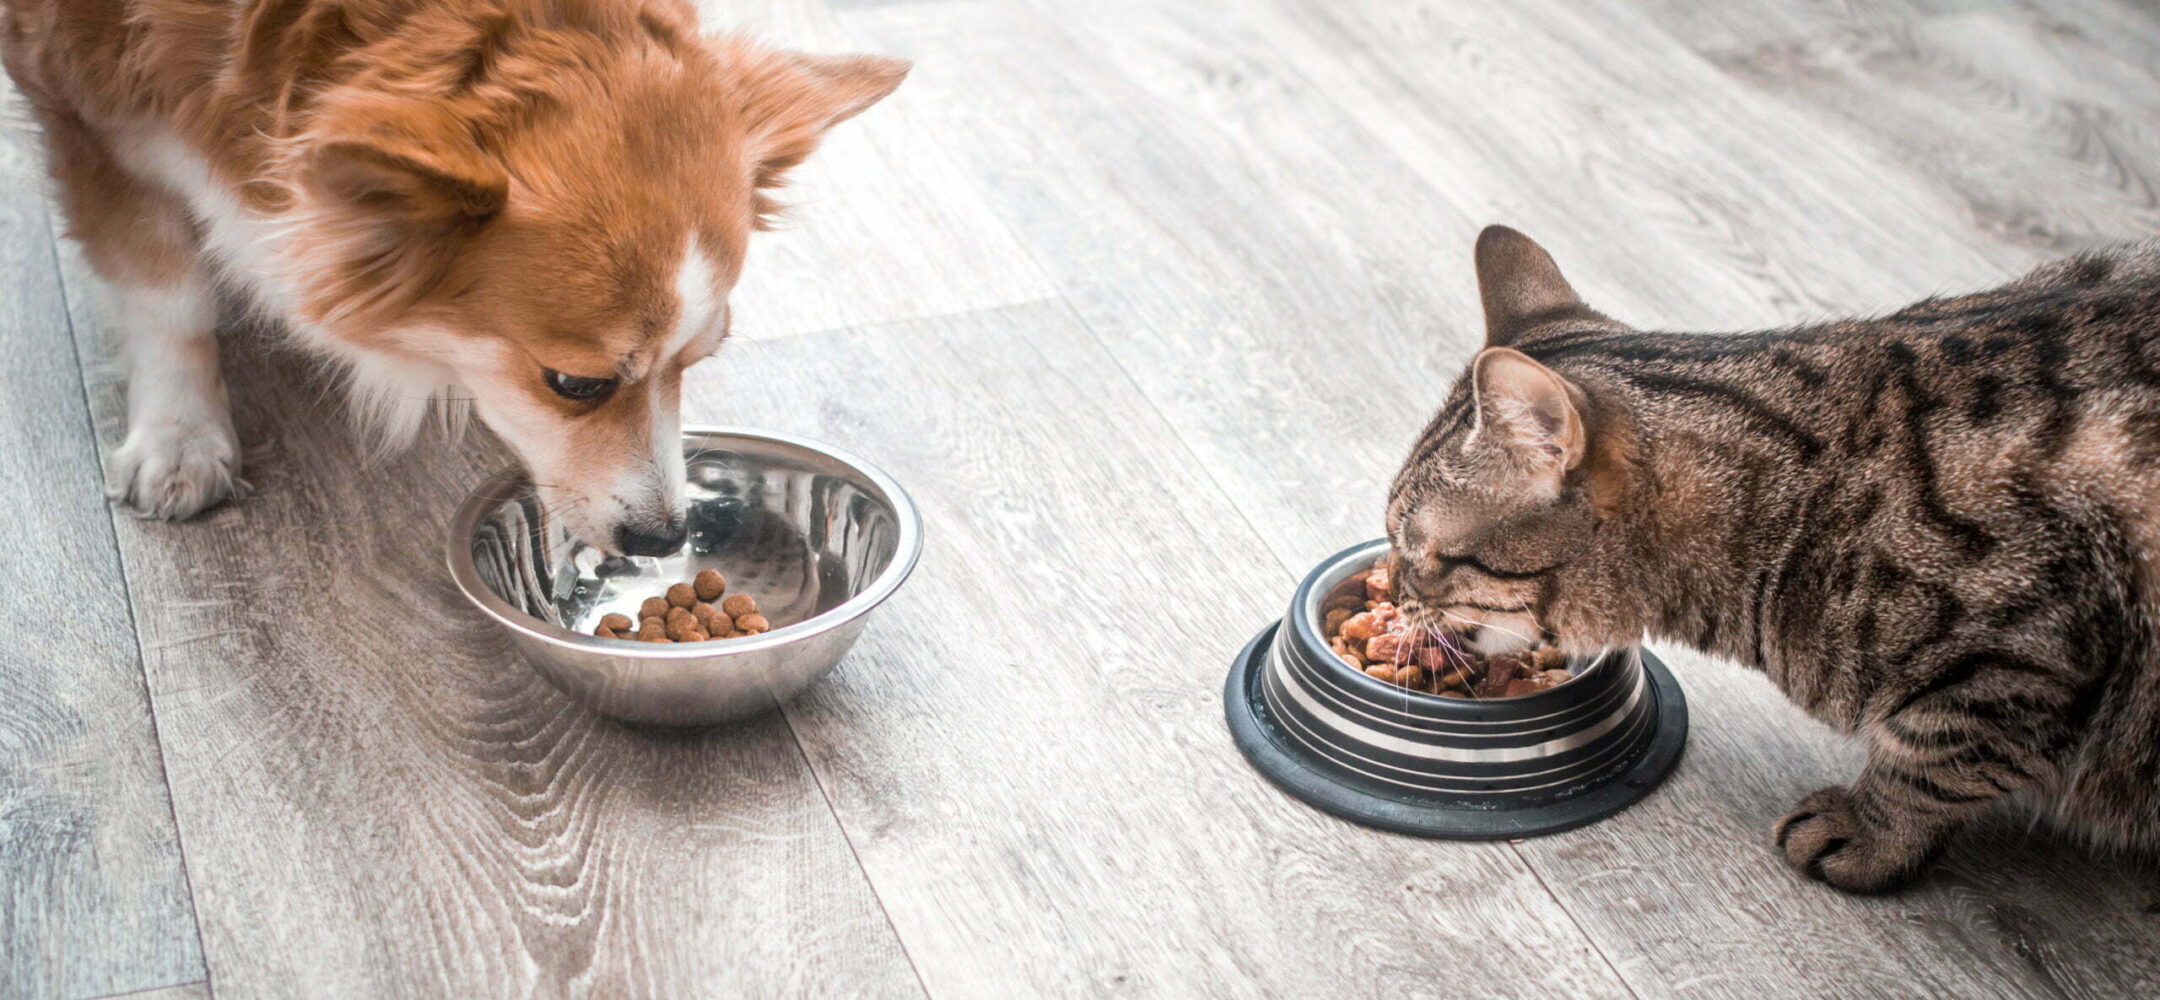 dog and a cat are eating together from a bowl of food